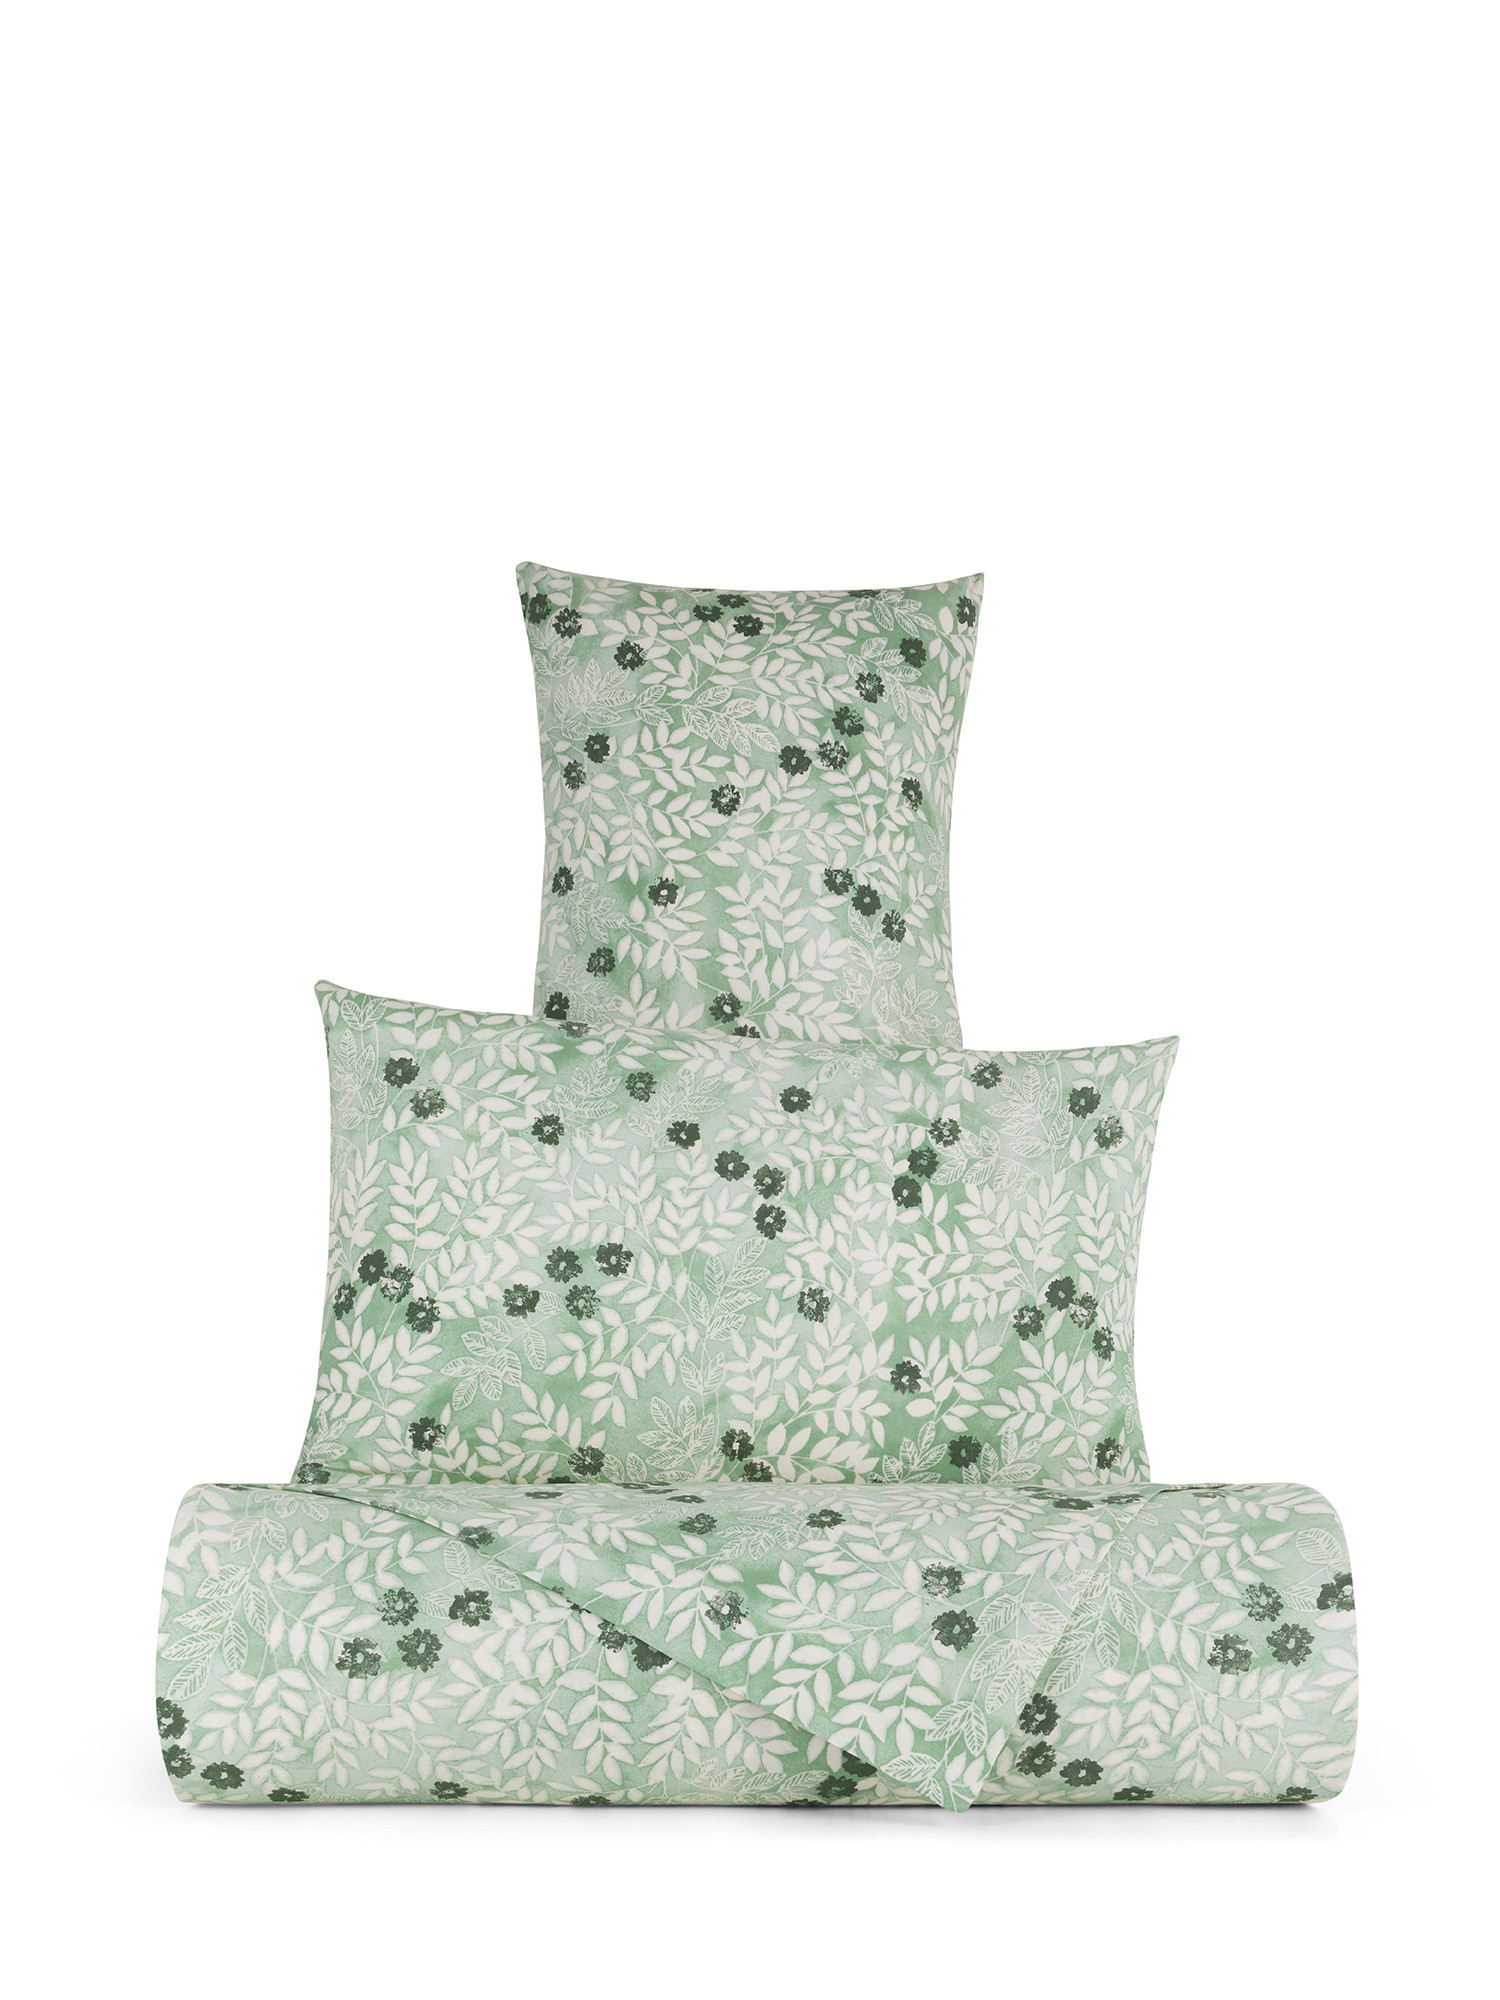 Floral patterned cotton percale duvet cover set, Green, large image number 0